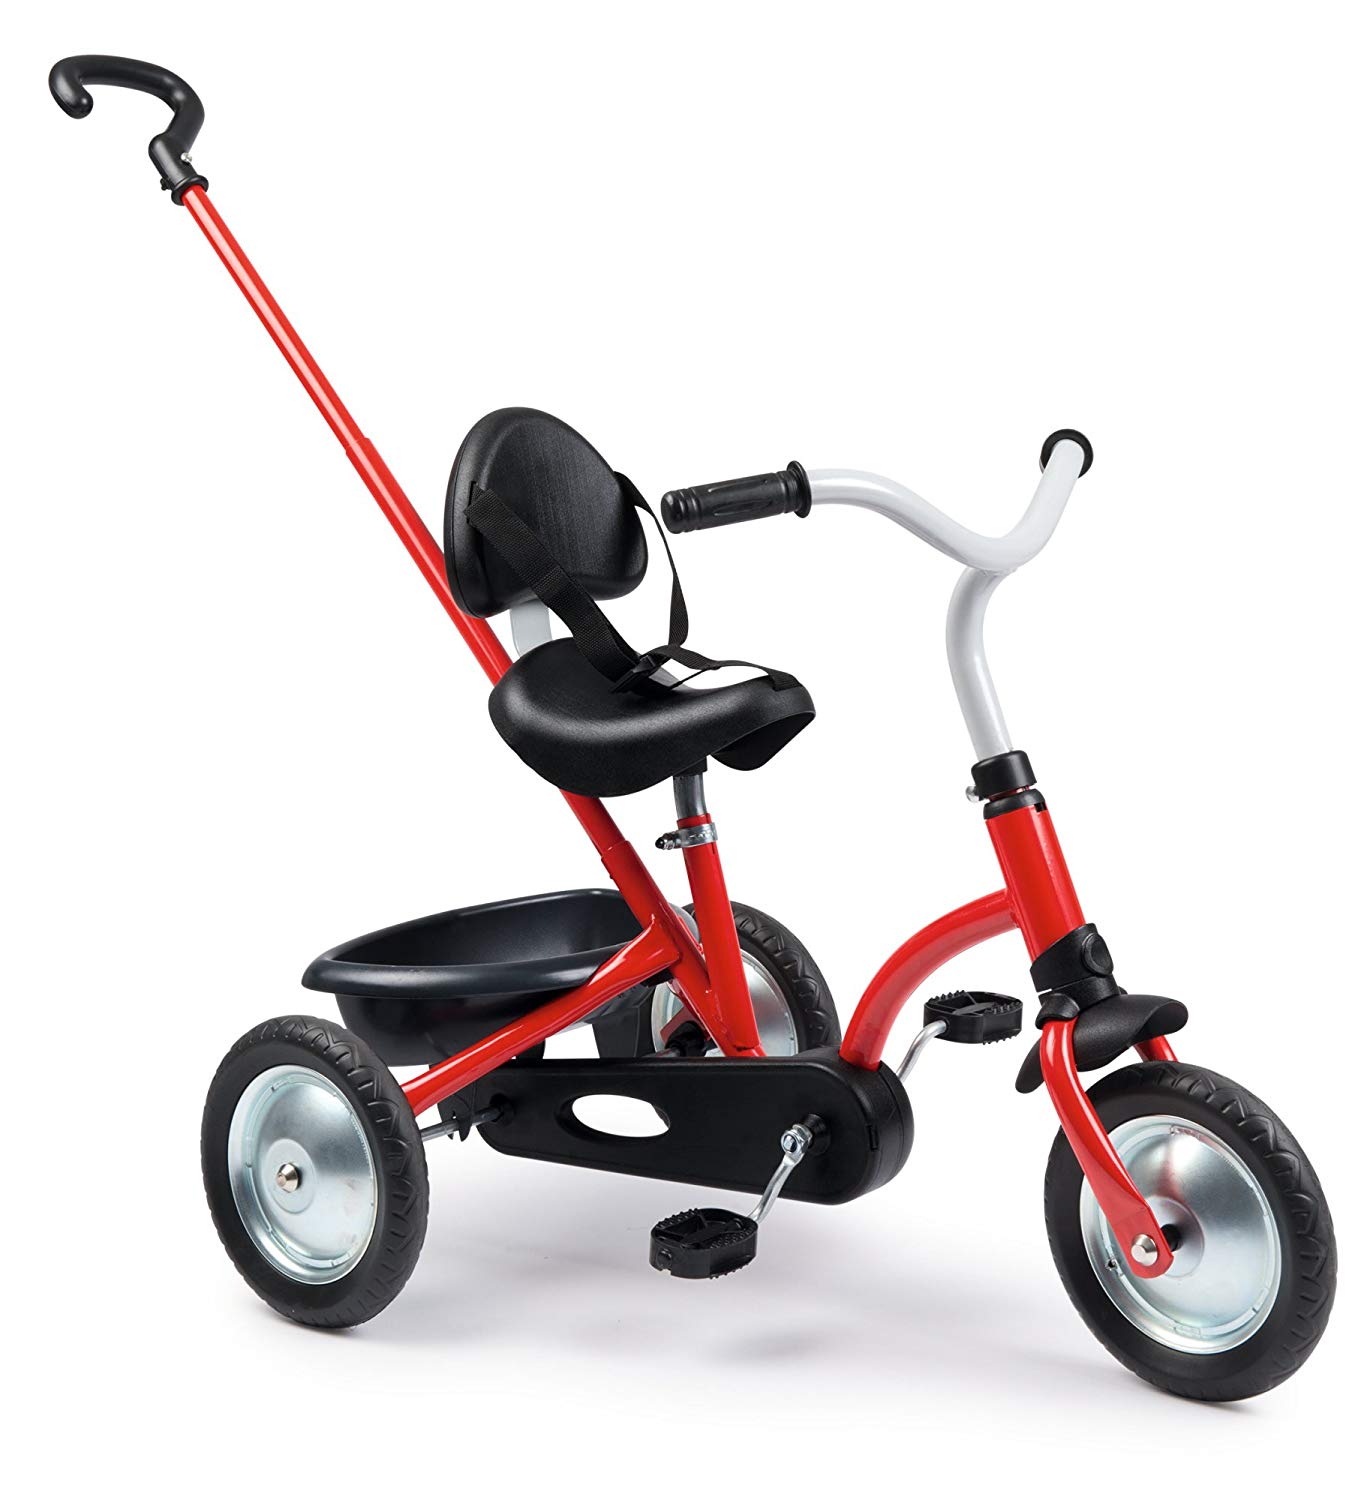 Smoby 740800 Zooky Tricycle – Red